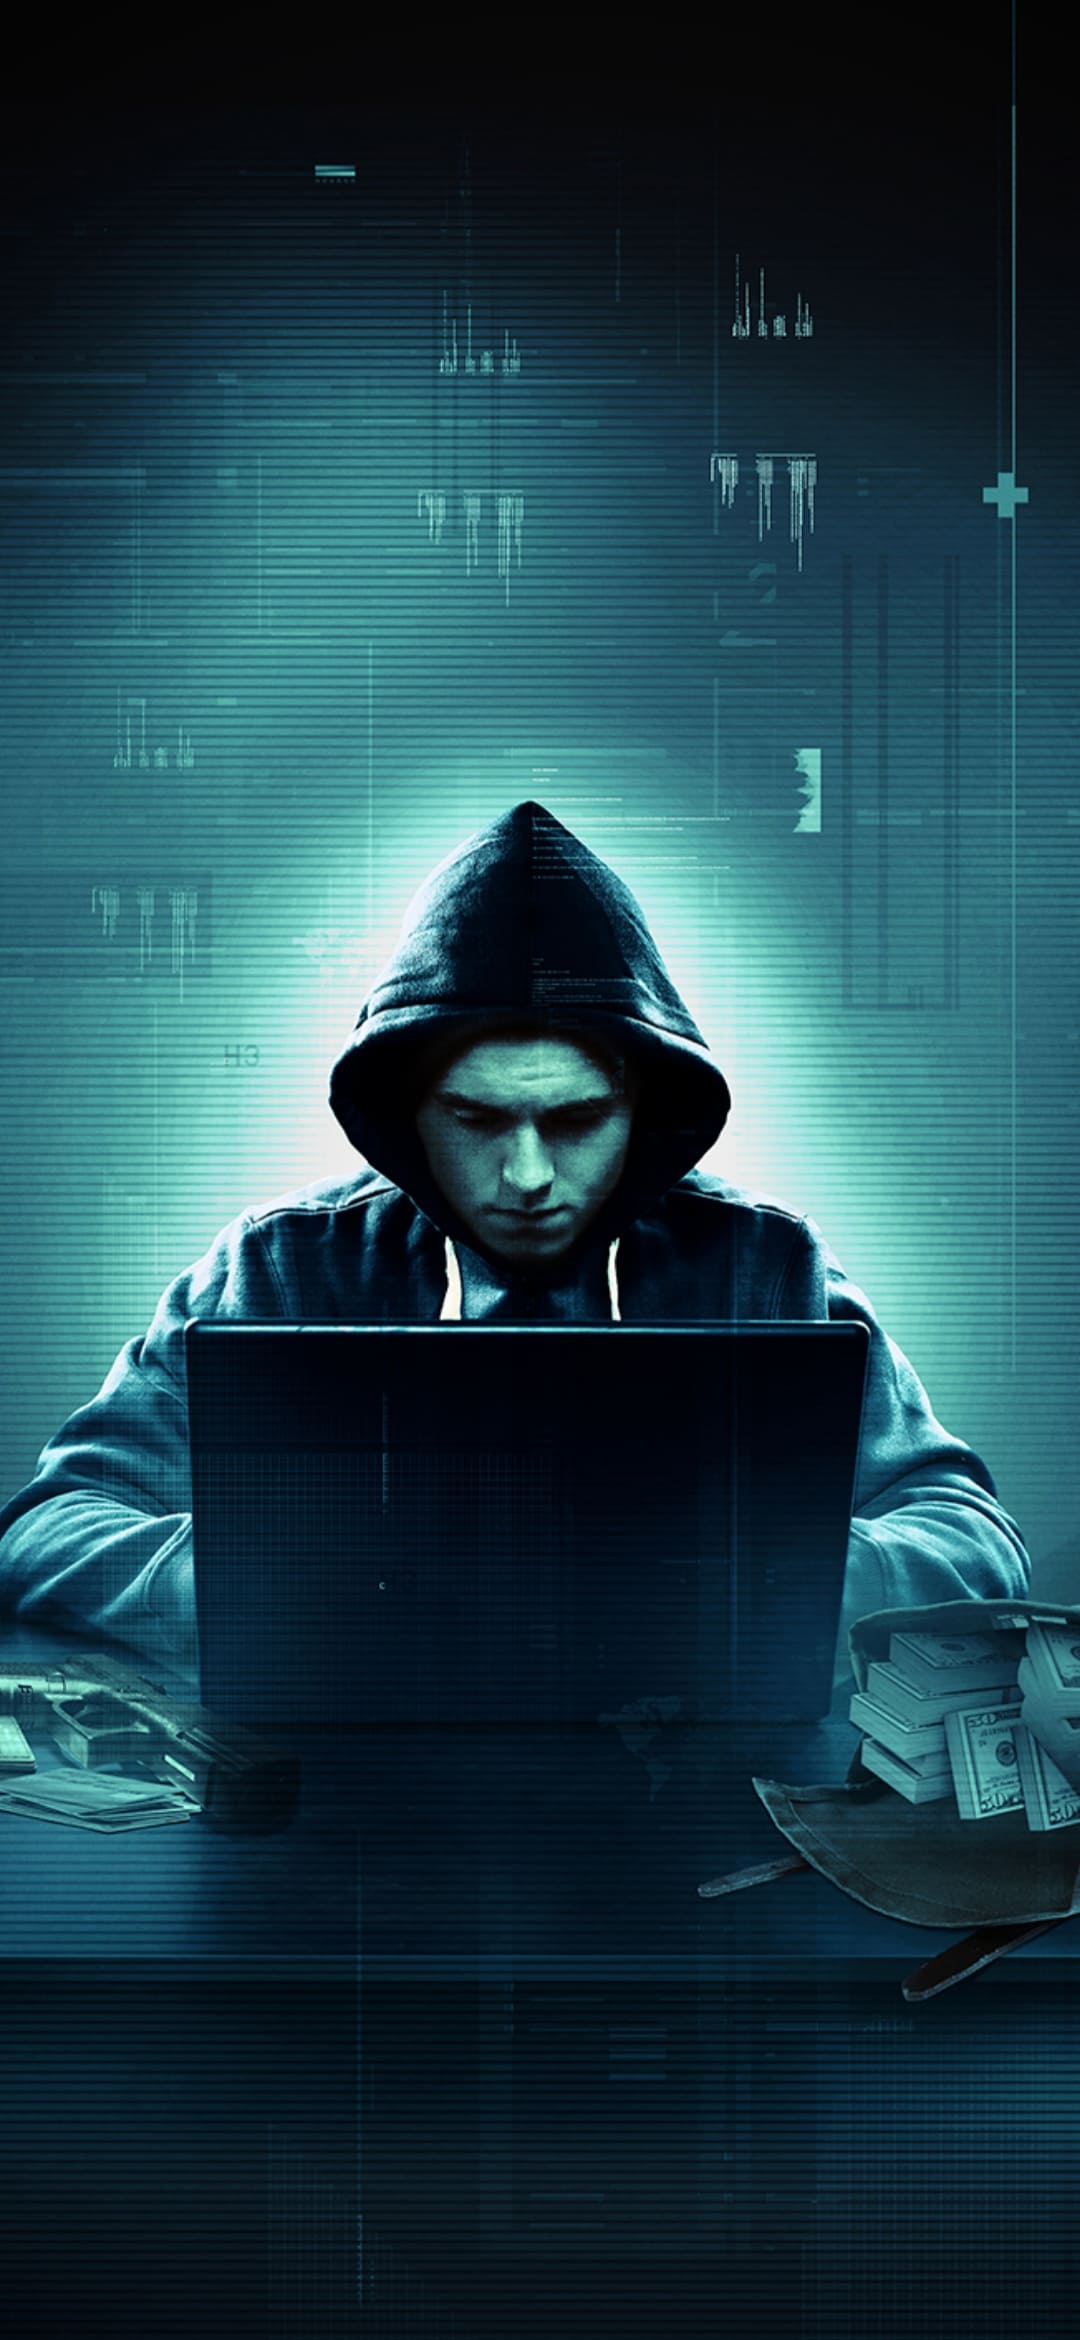 Create a wallpaper for cool hacker | Wallpapers.ai